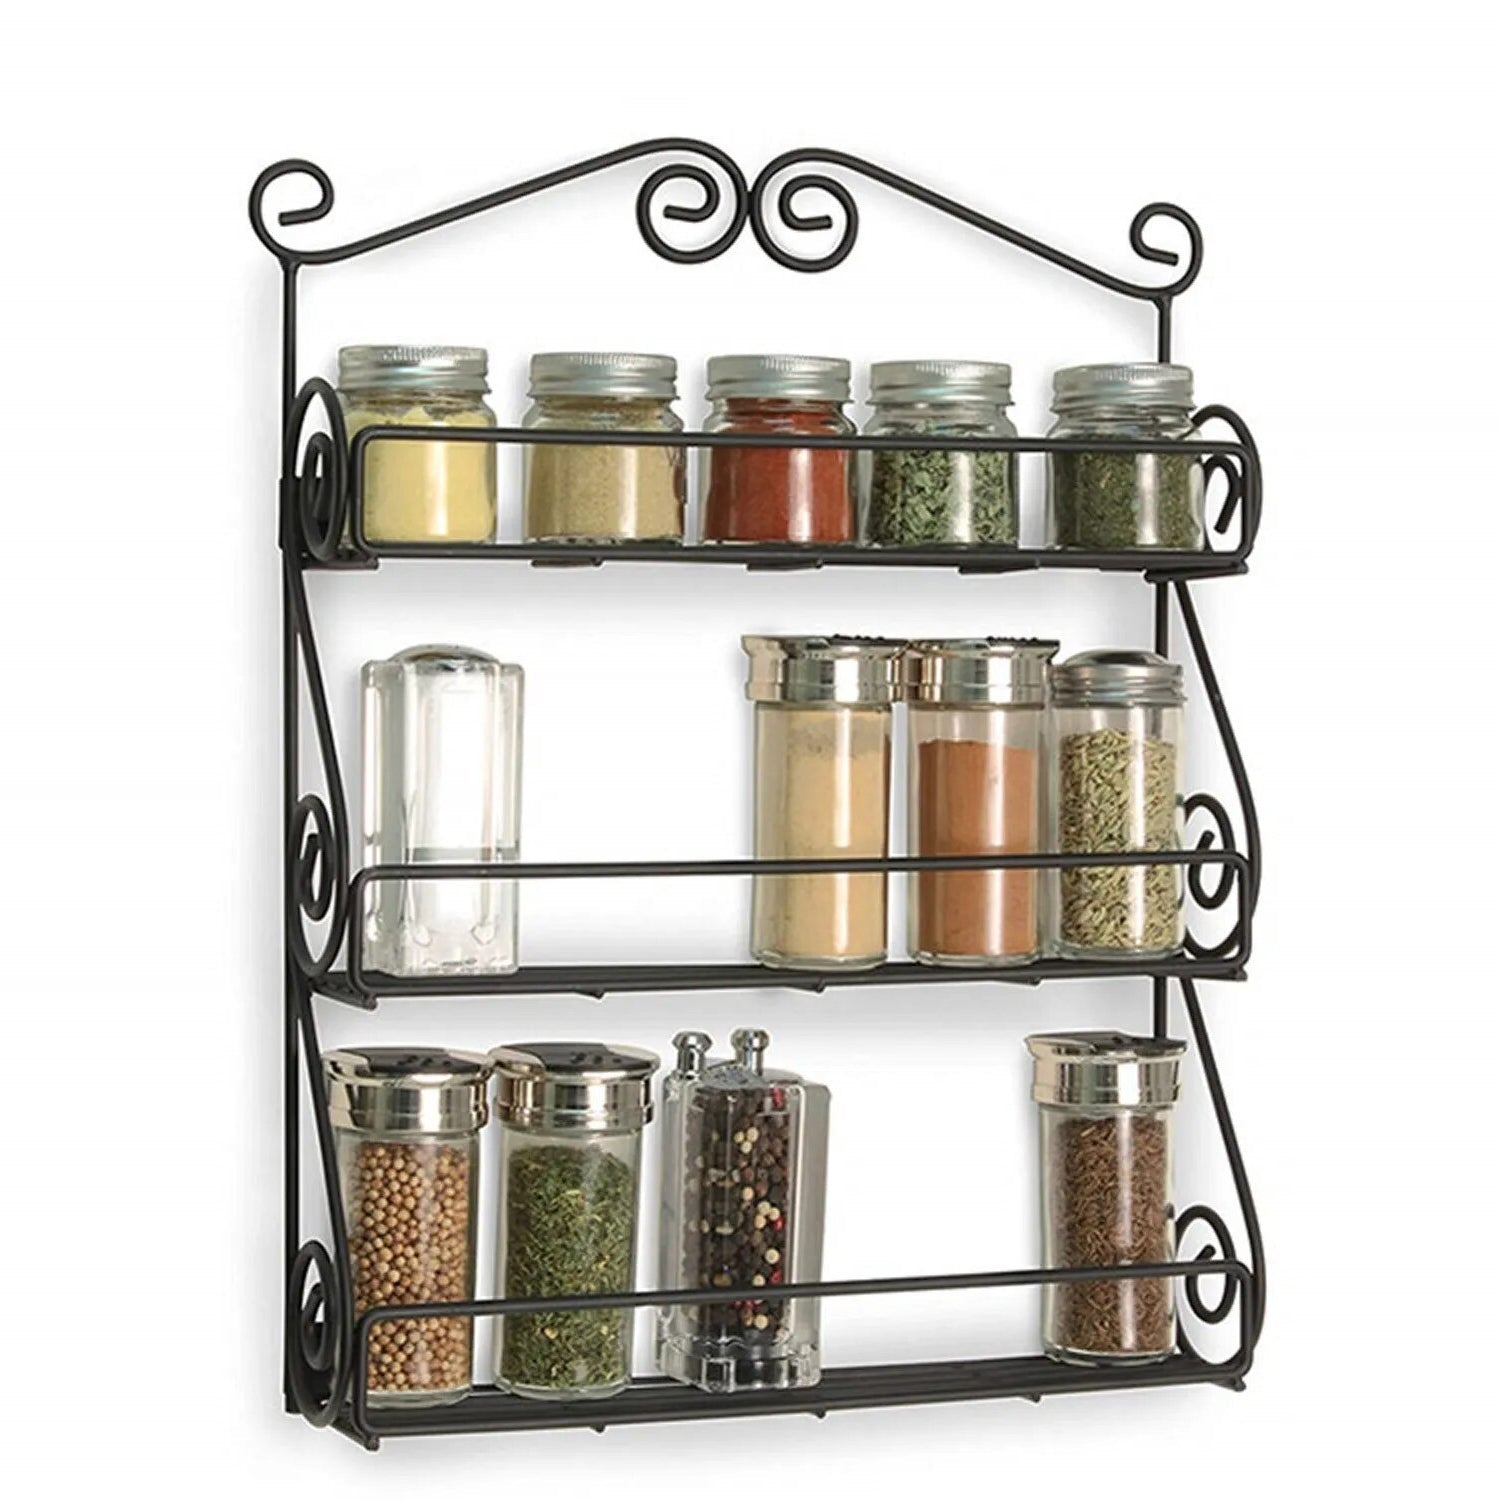 5857 Big Wall Mounted Iron Wall Shelf with 3 Storage Racks for Kitchen, Pantry, Cabinet, Counter top or Free Standing, Rack Holder for Kitchen